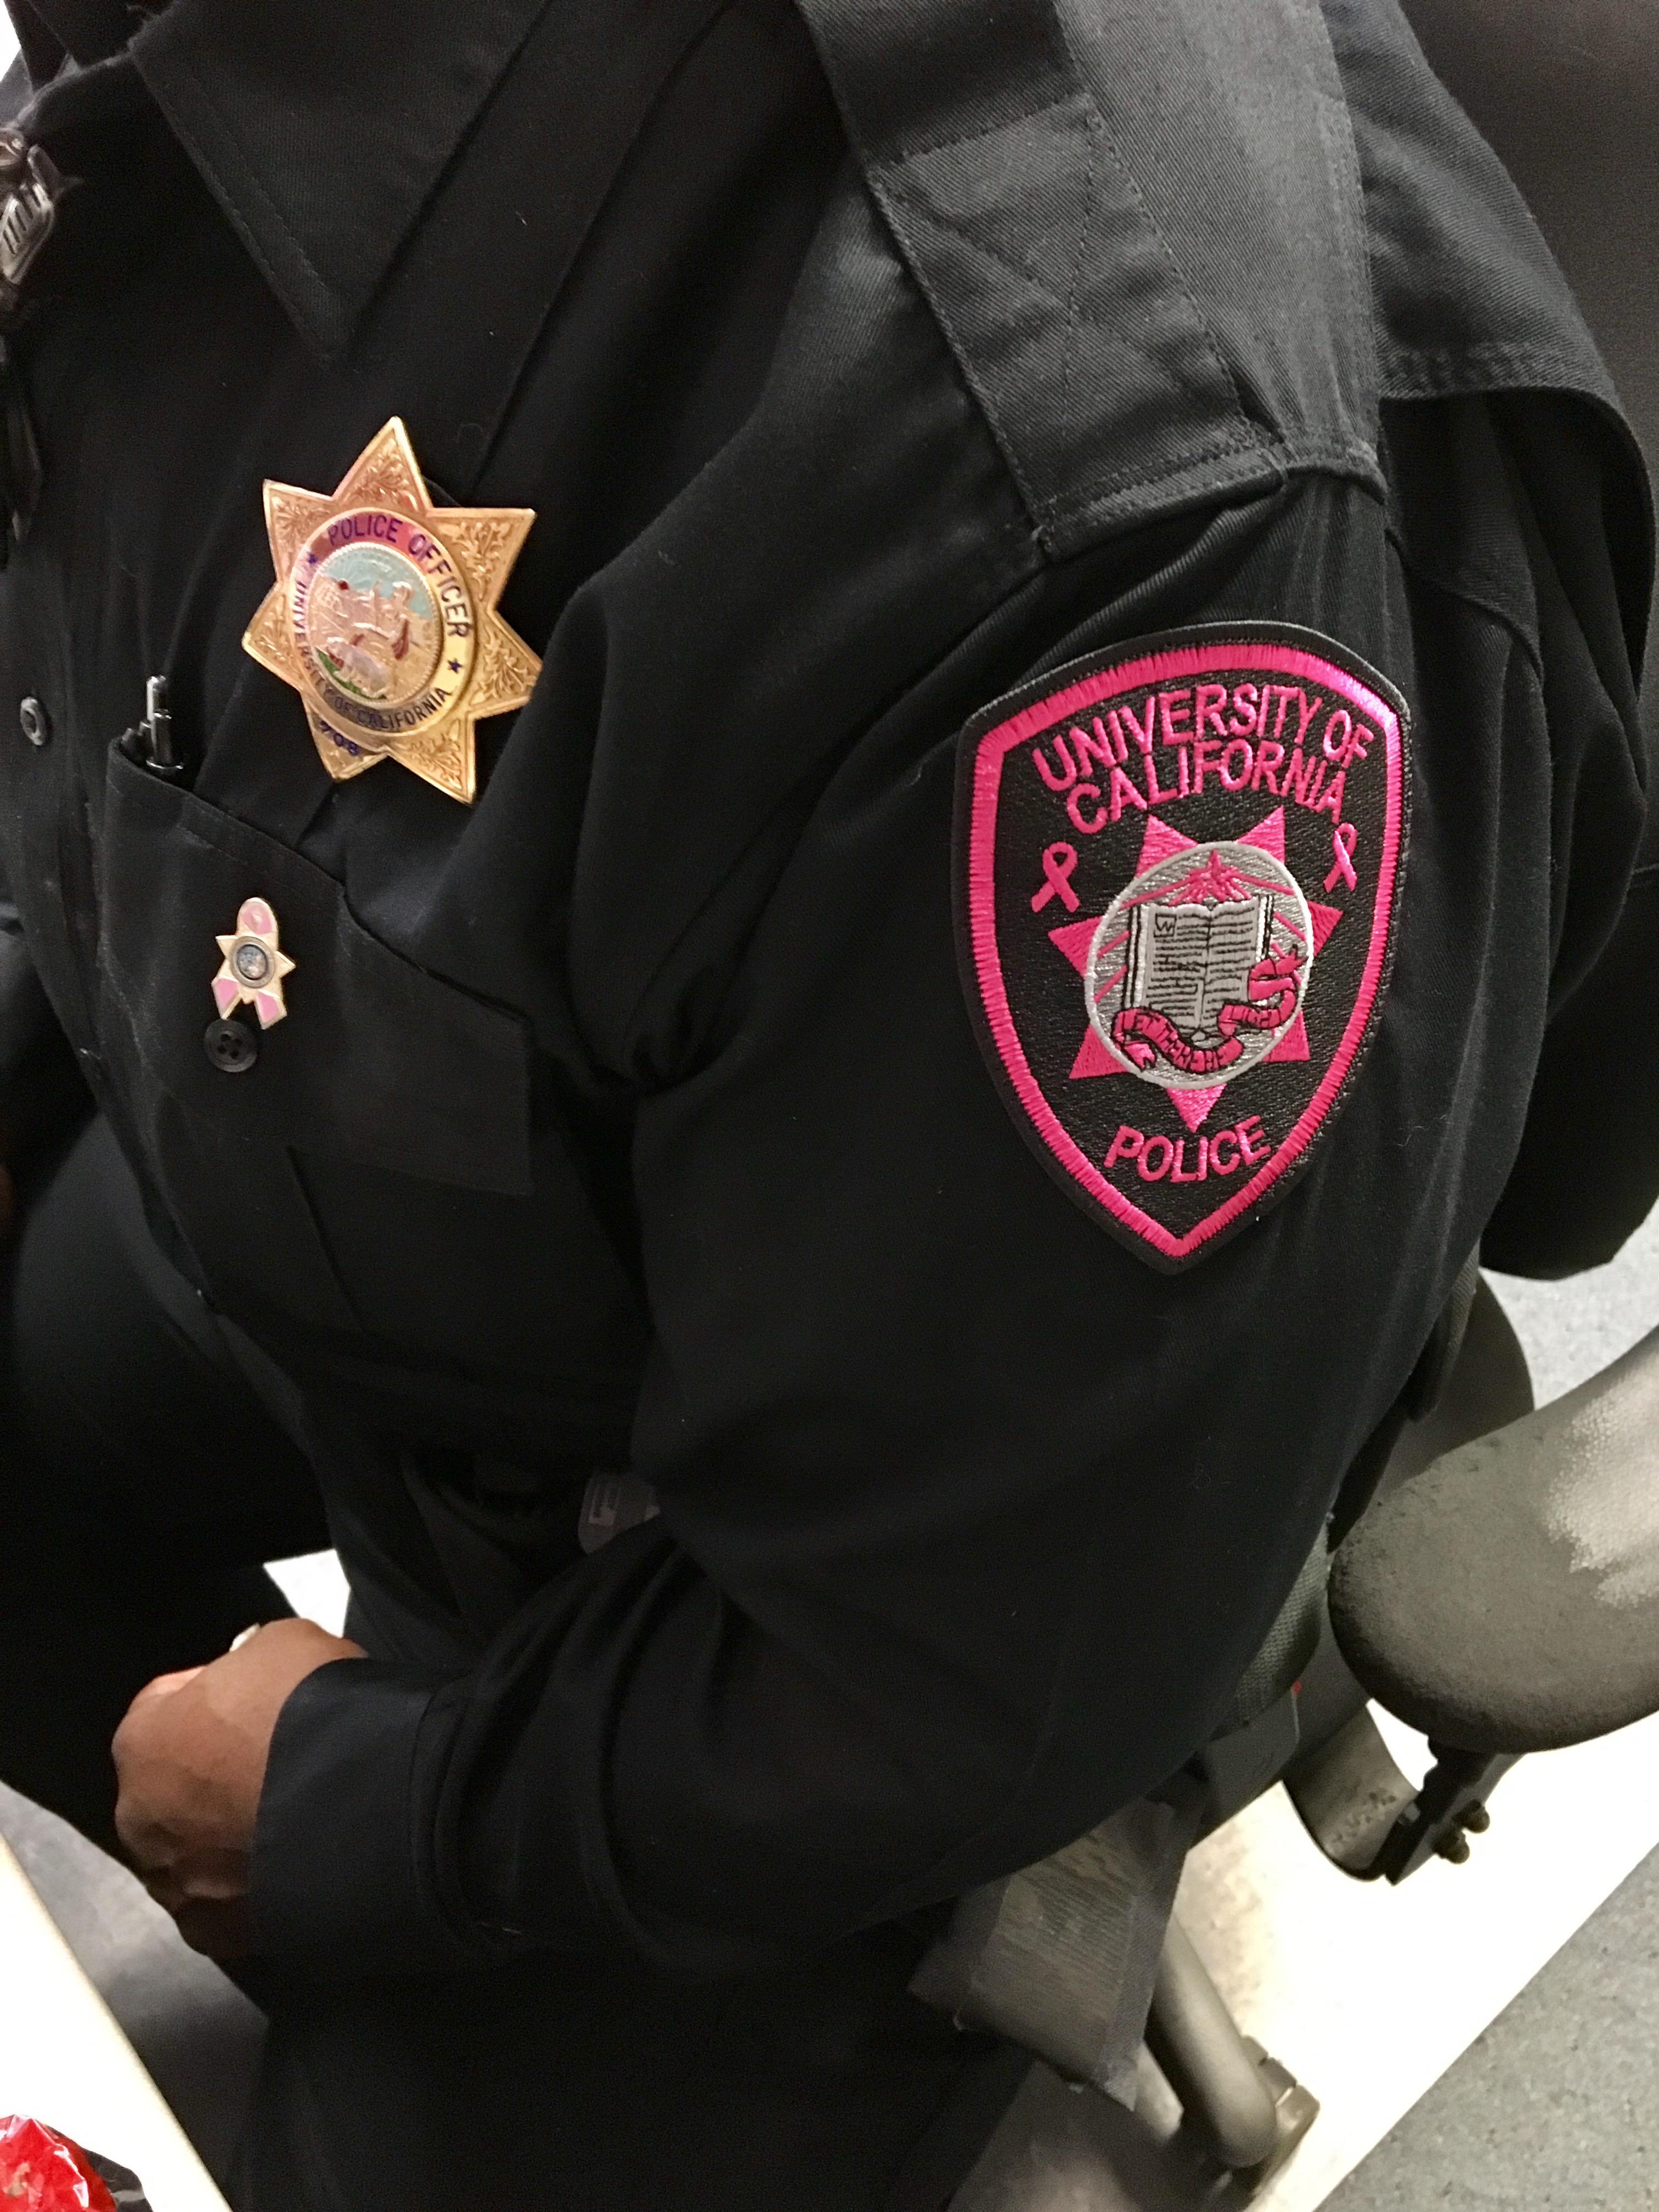 UCSB Police Pink Patch